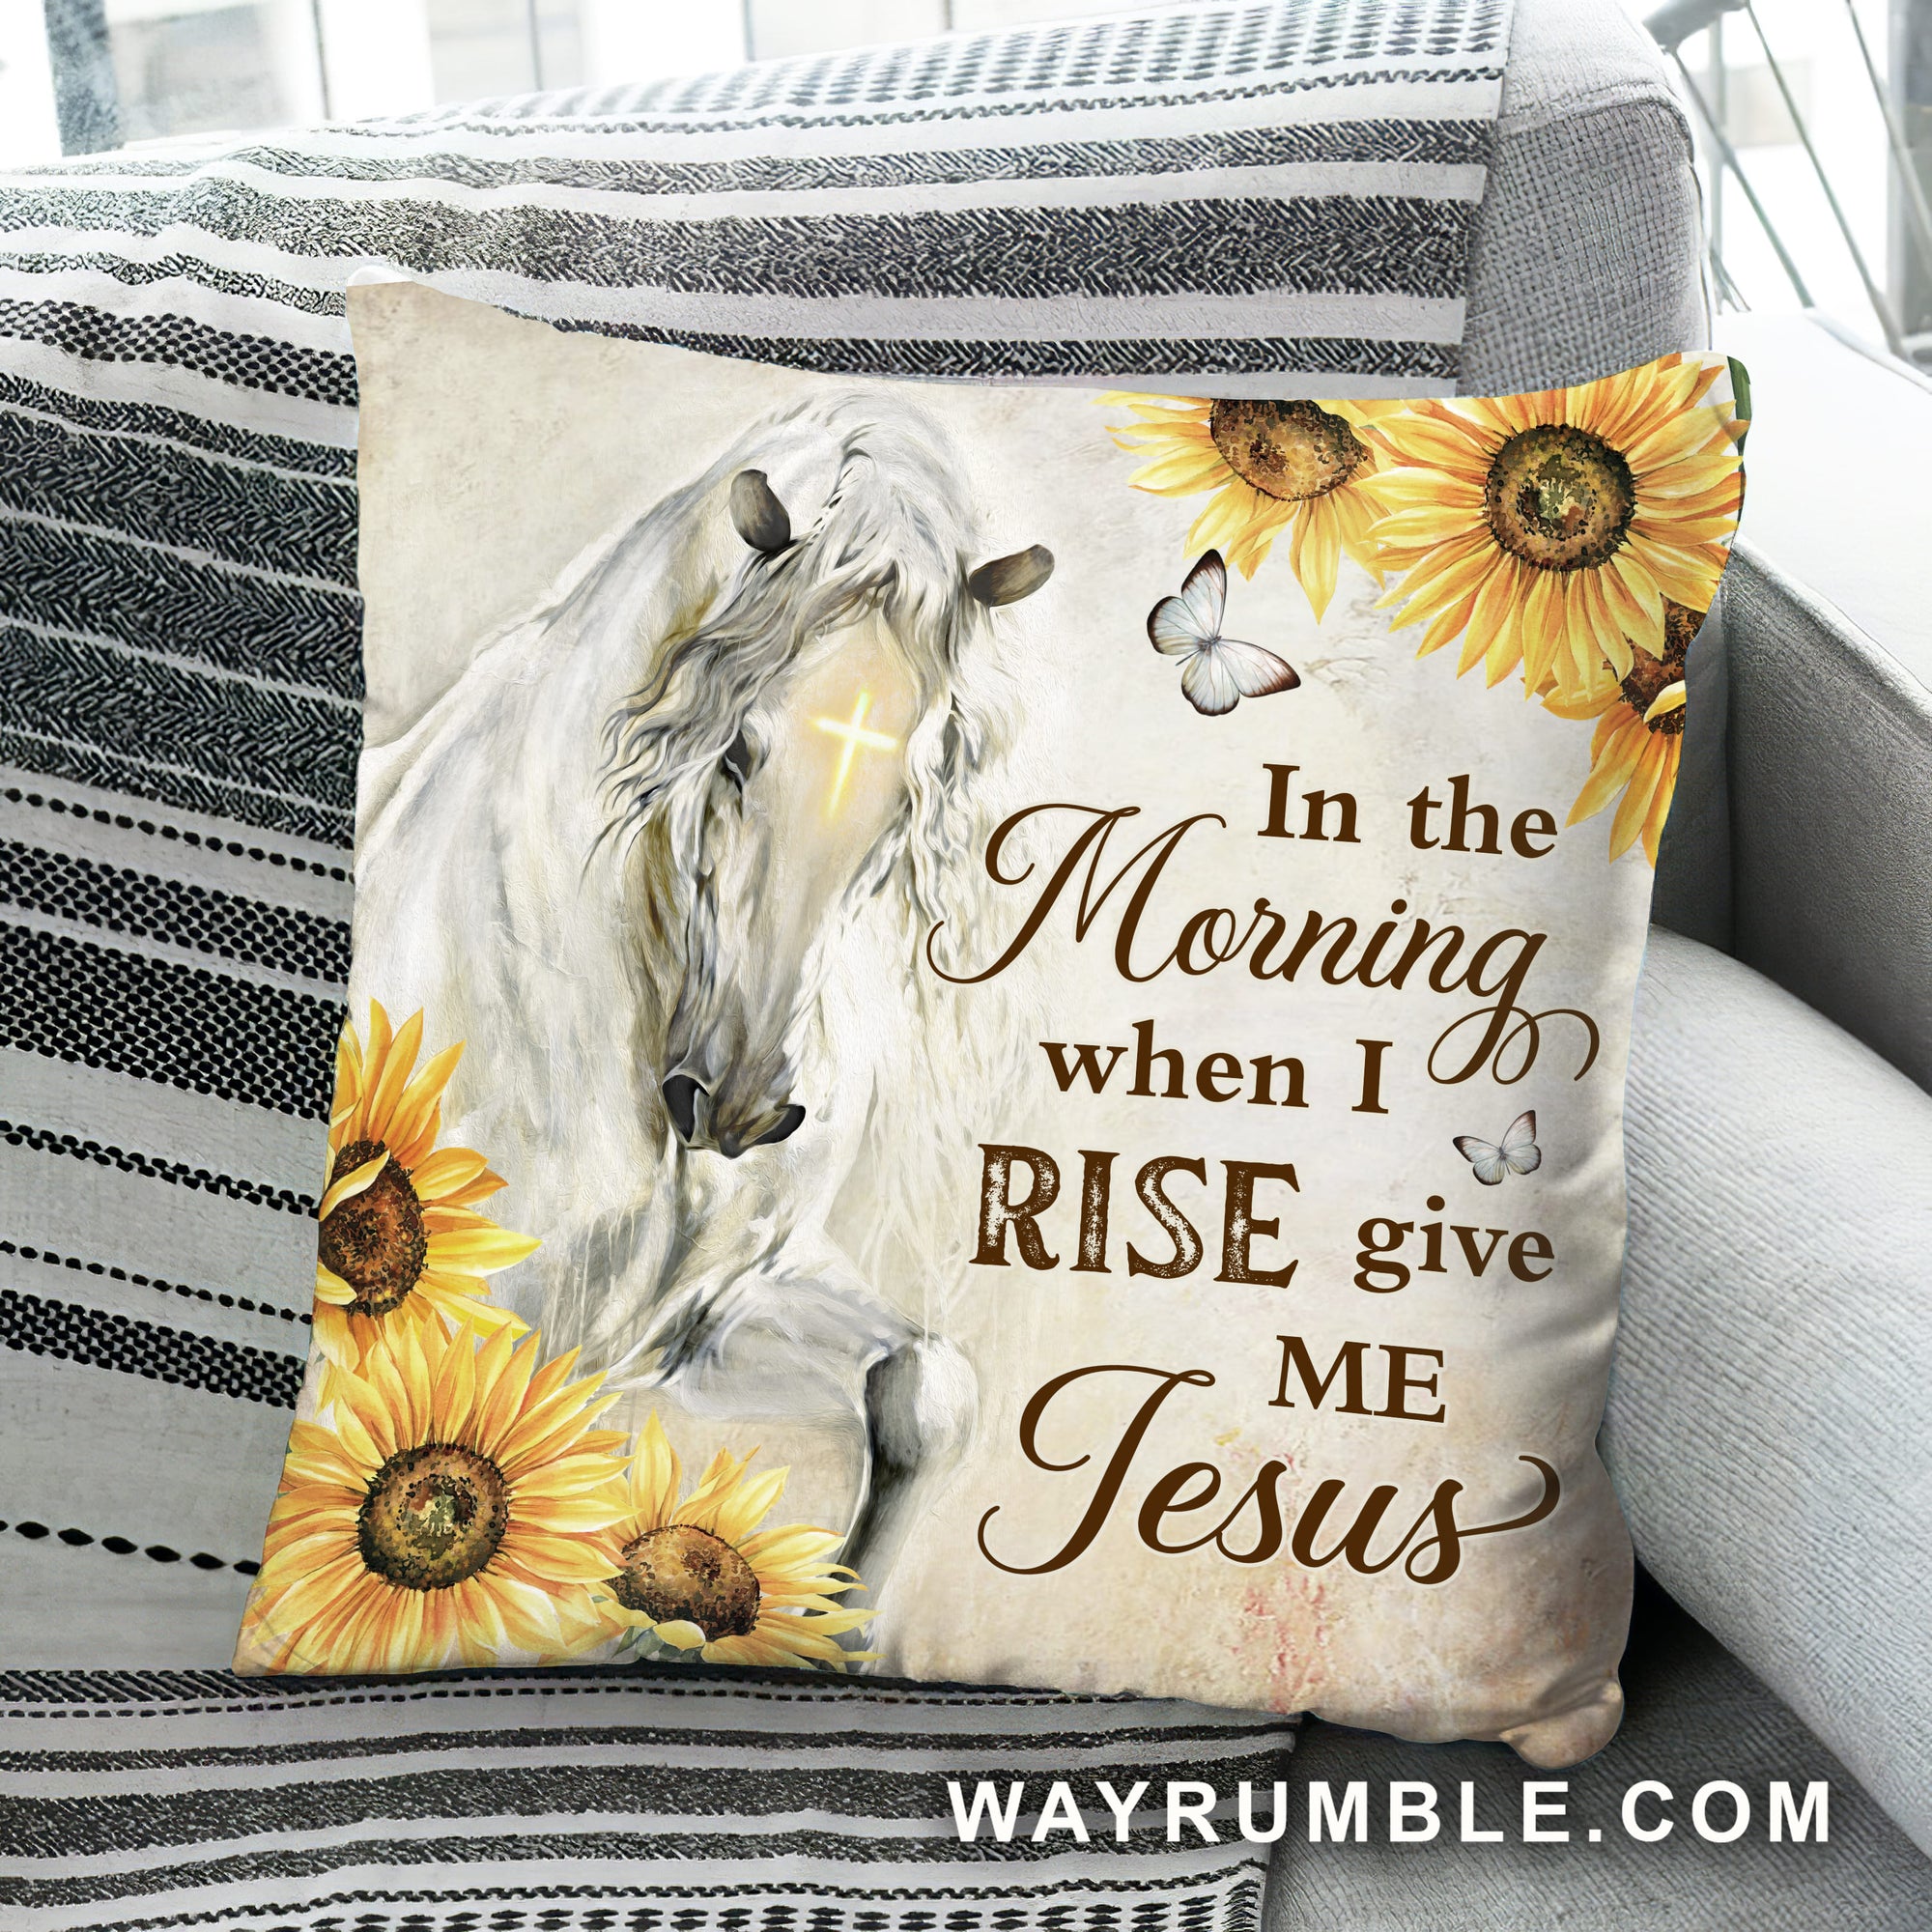 Jesus - White horse - In the morning when I rise give me Jesus - Pillow